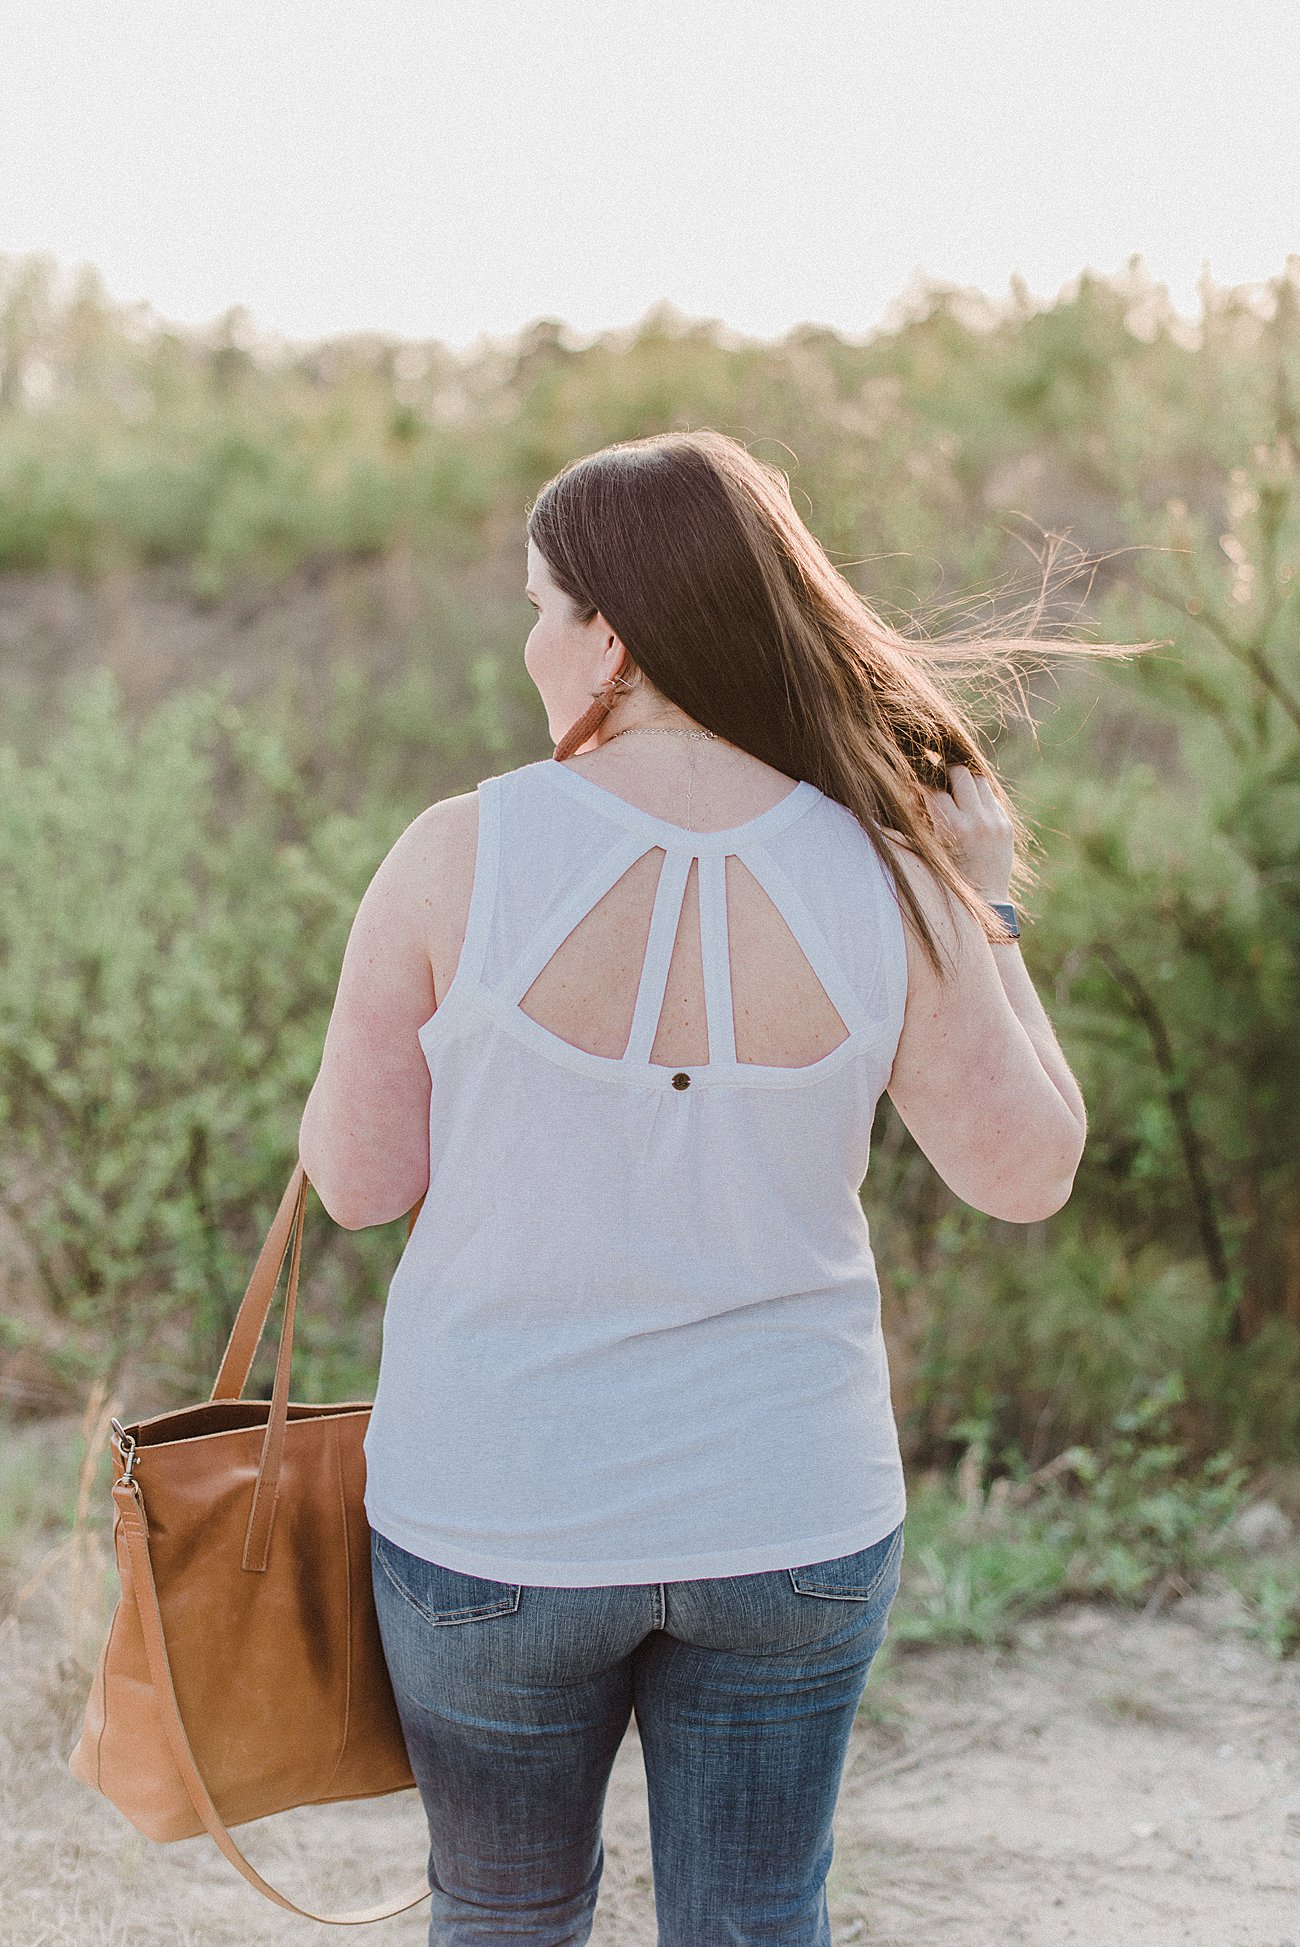 prAna Organic Cotton - Ethical and Fair Trade Fashion #GoOrganic #prAnaSpring18 (1) - prAna Organic Cotton Clothing styled by popular North Carolina ethical fashion blogger Still Being Molly